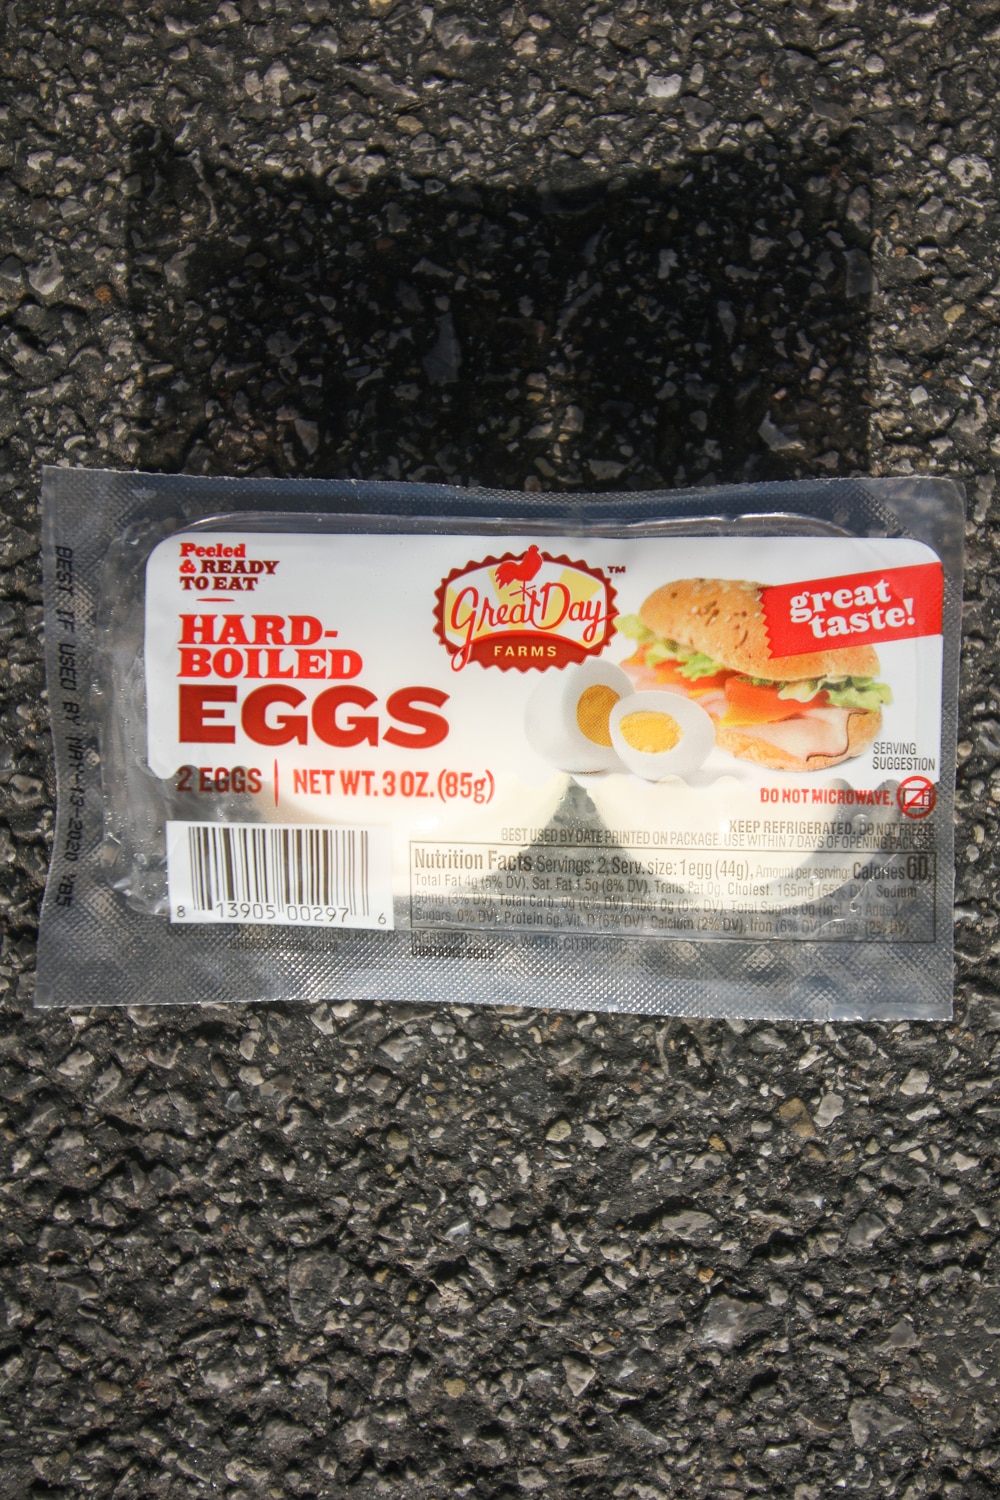 A package with 2 hard boiled eggs in it.